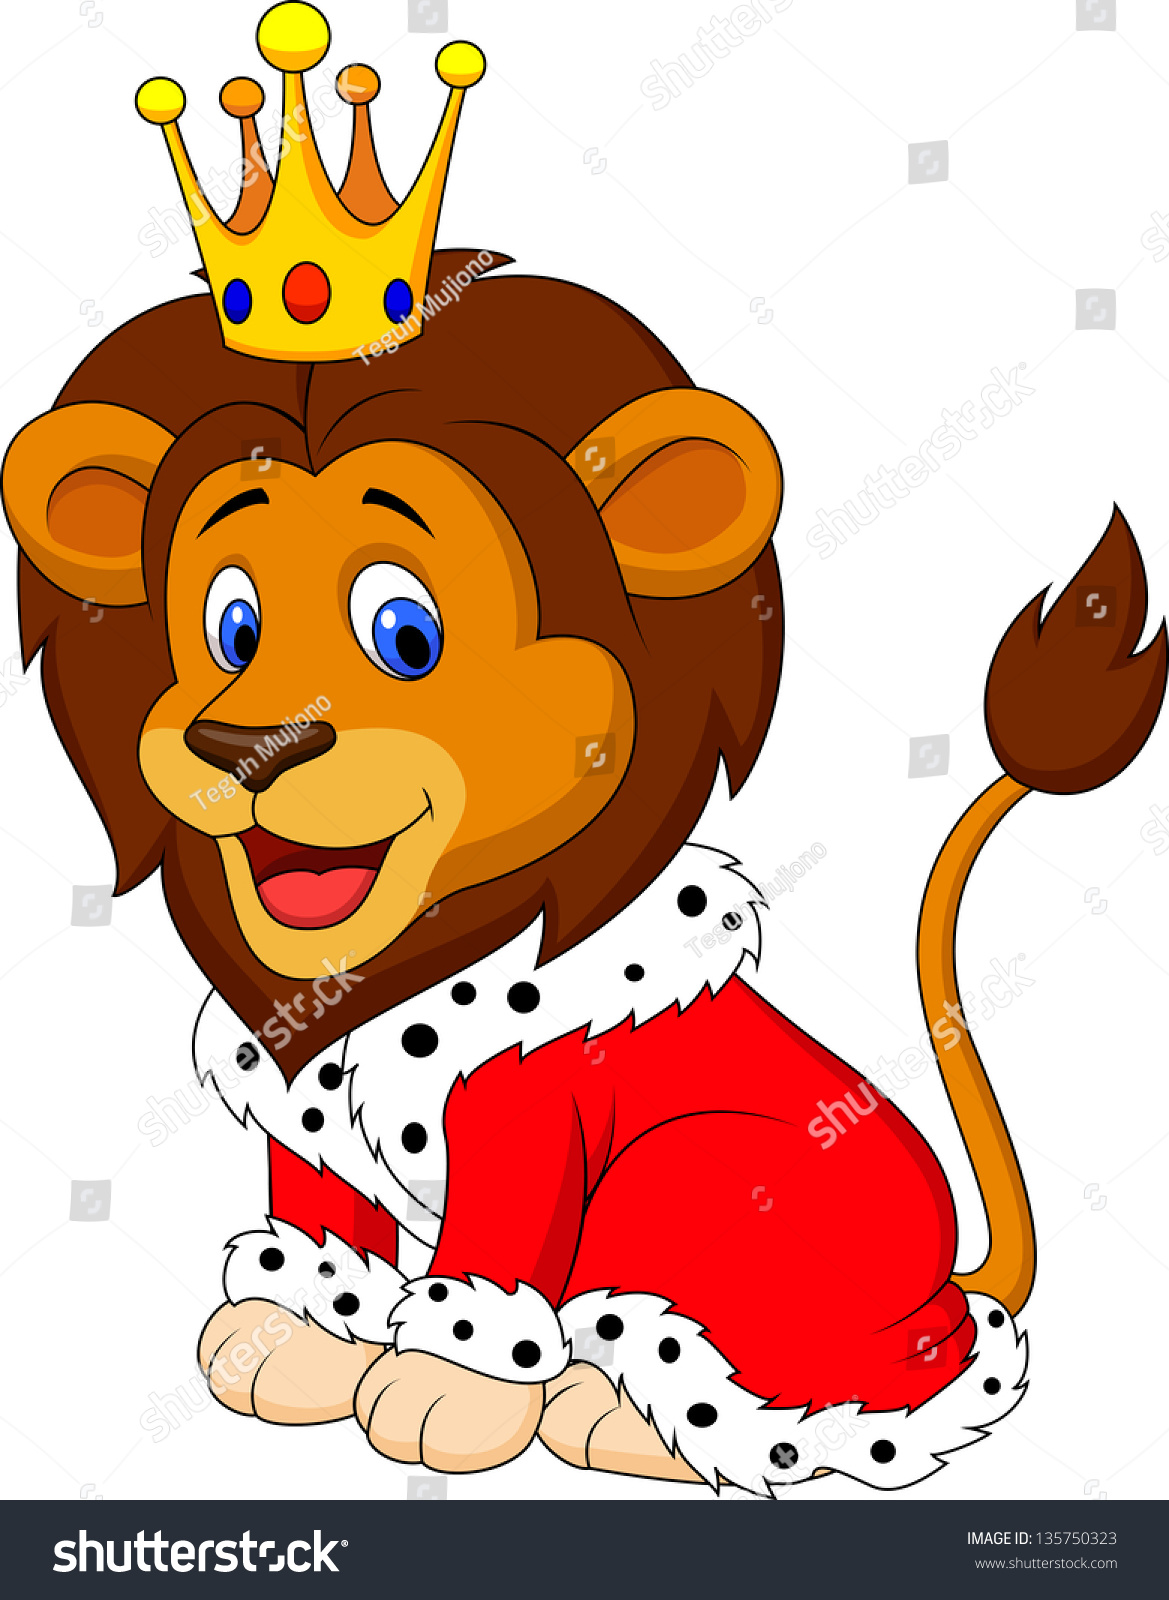 Cartoon Lion In King Outfit Stock Photo 135750323 : Shutterstock